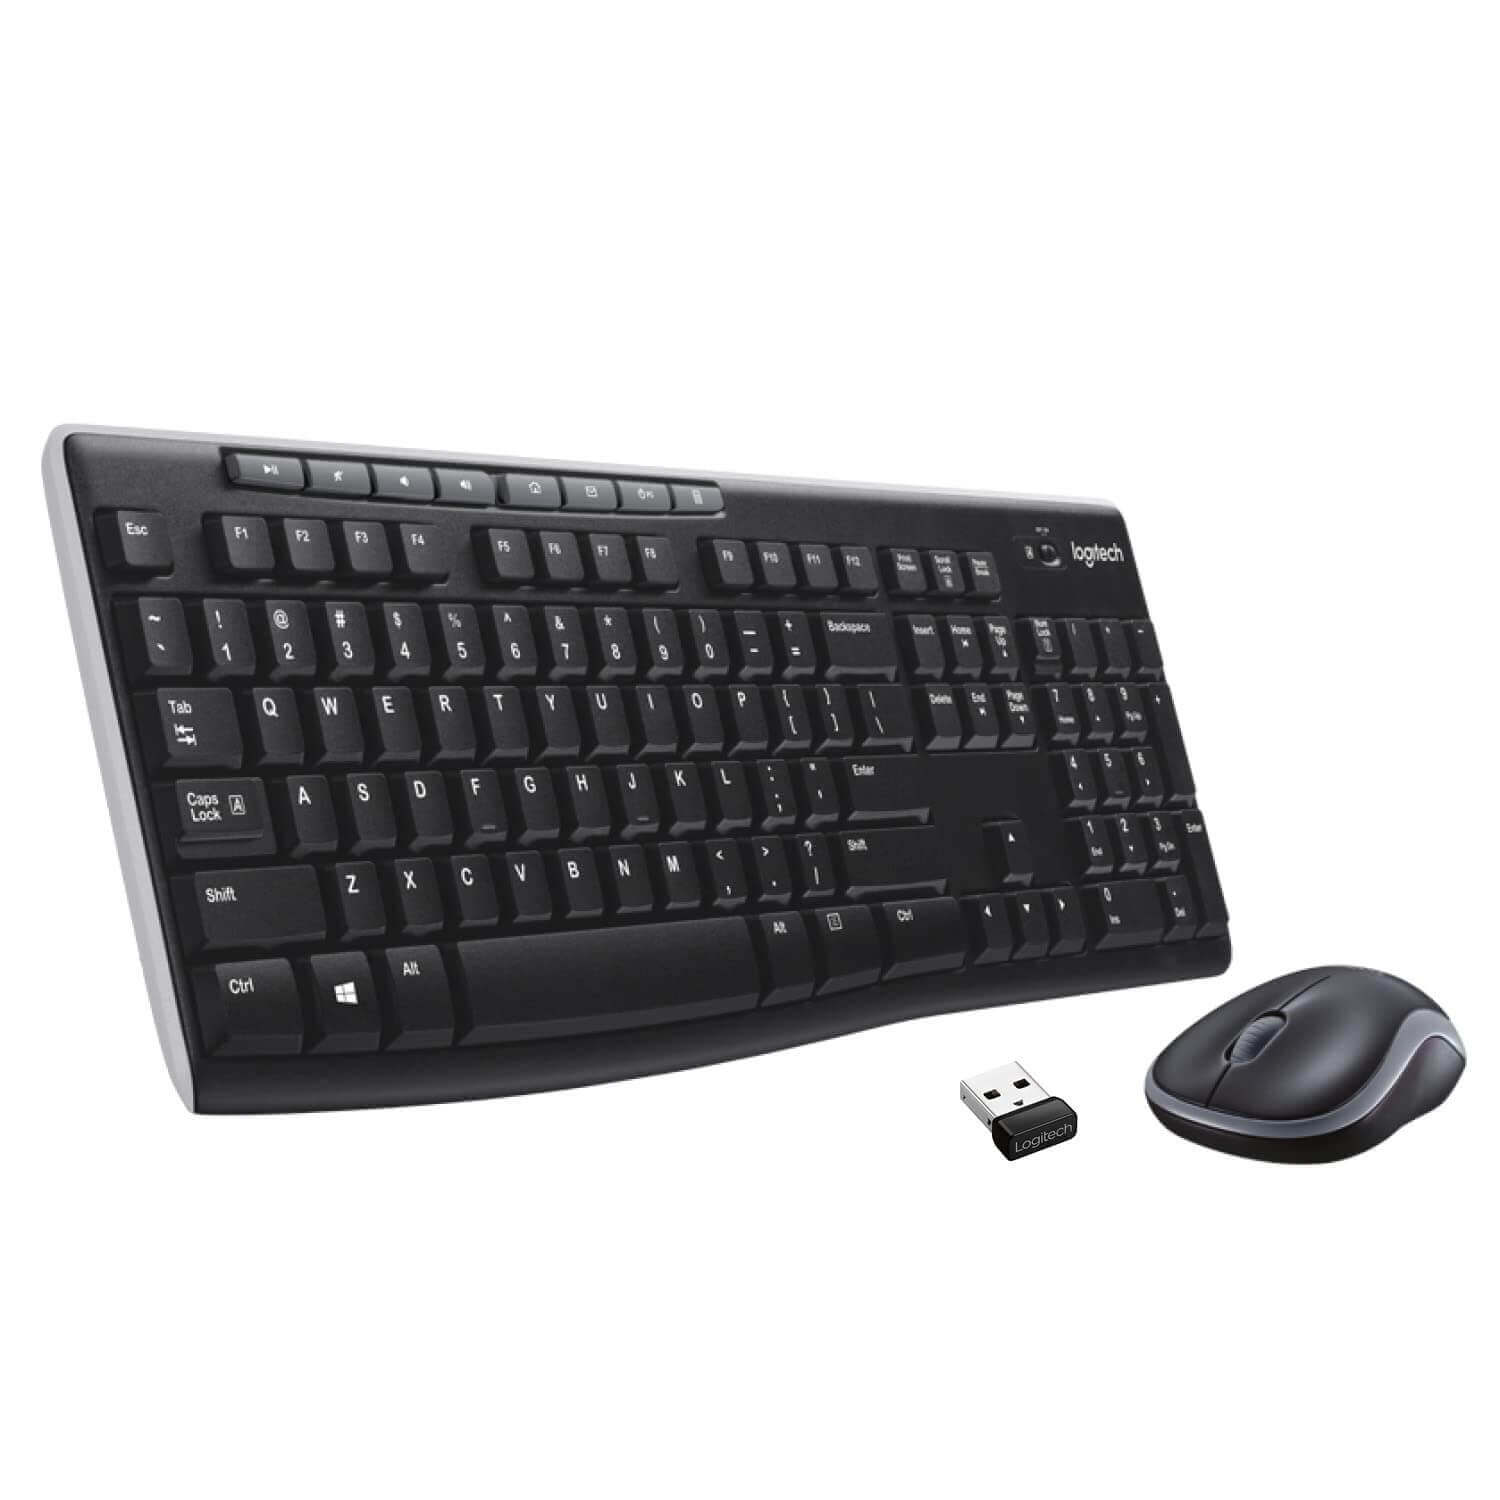 Logitech MK270r Wireless Keyboard and Mouse Combo for Windows, 2.4 GHz Wireless, Spill-resistant Design